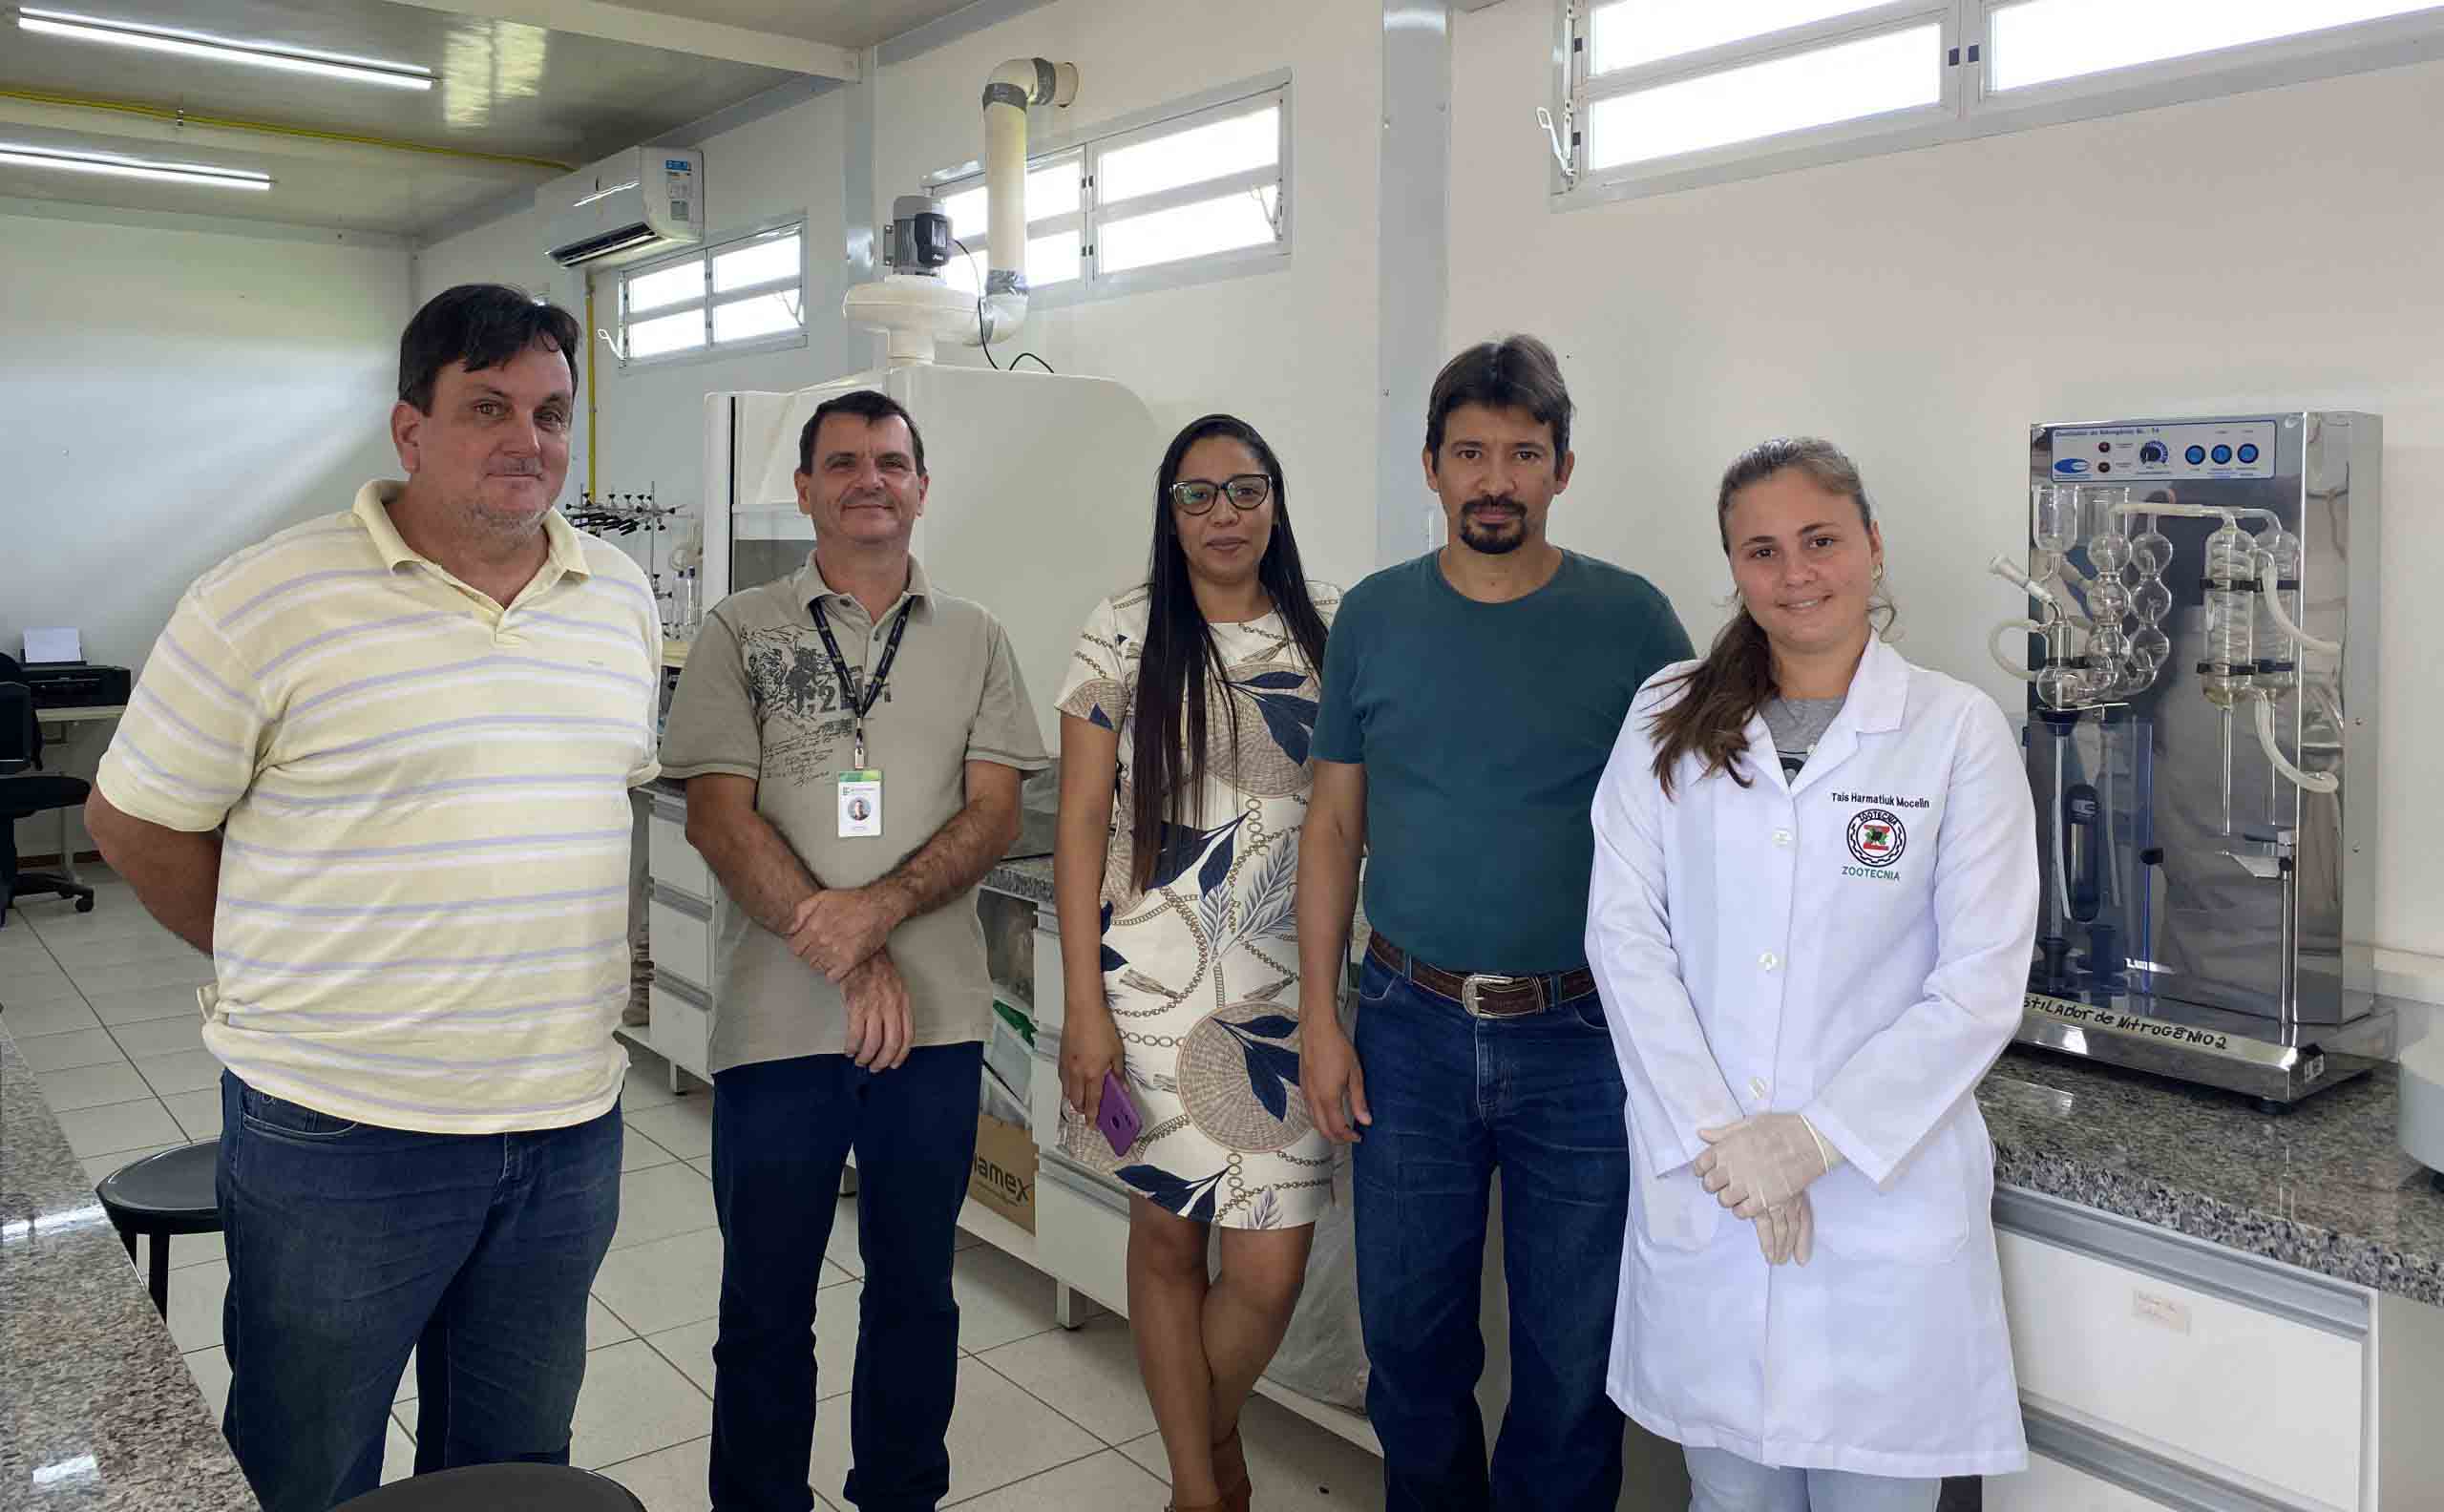 The Conect @ gro project invests in technical training in Alta Floresta and Sinop » Notícia Exata